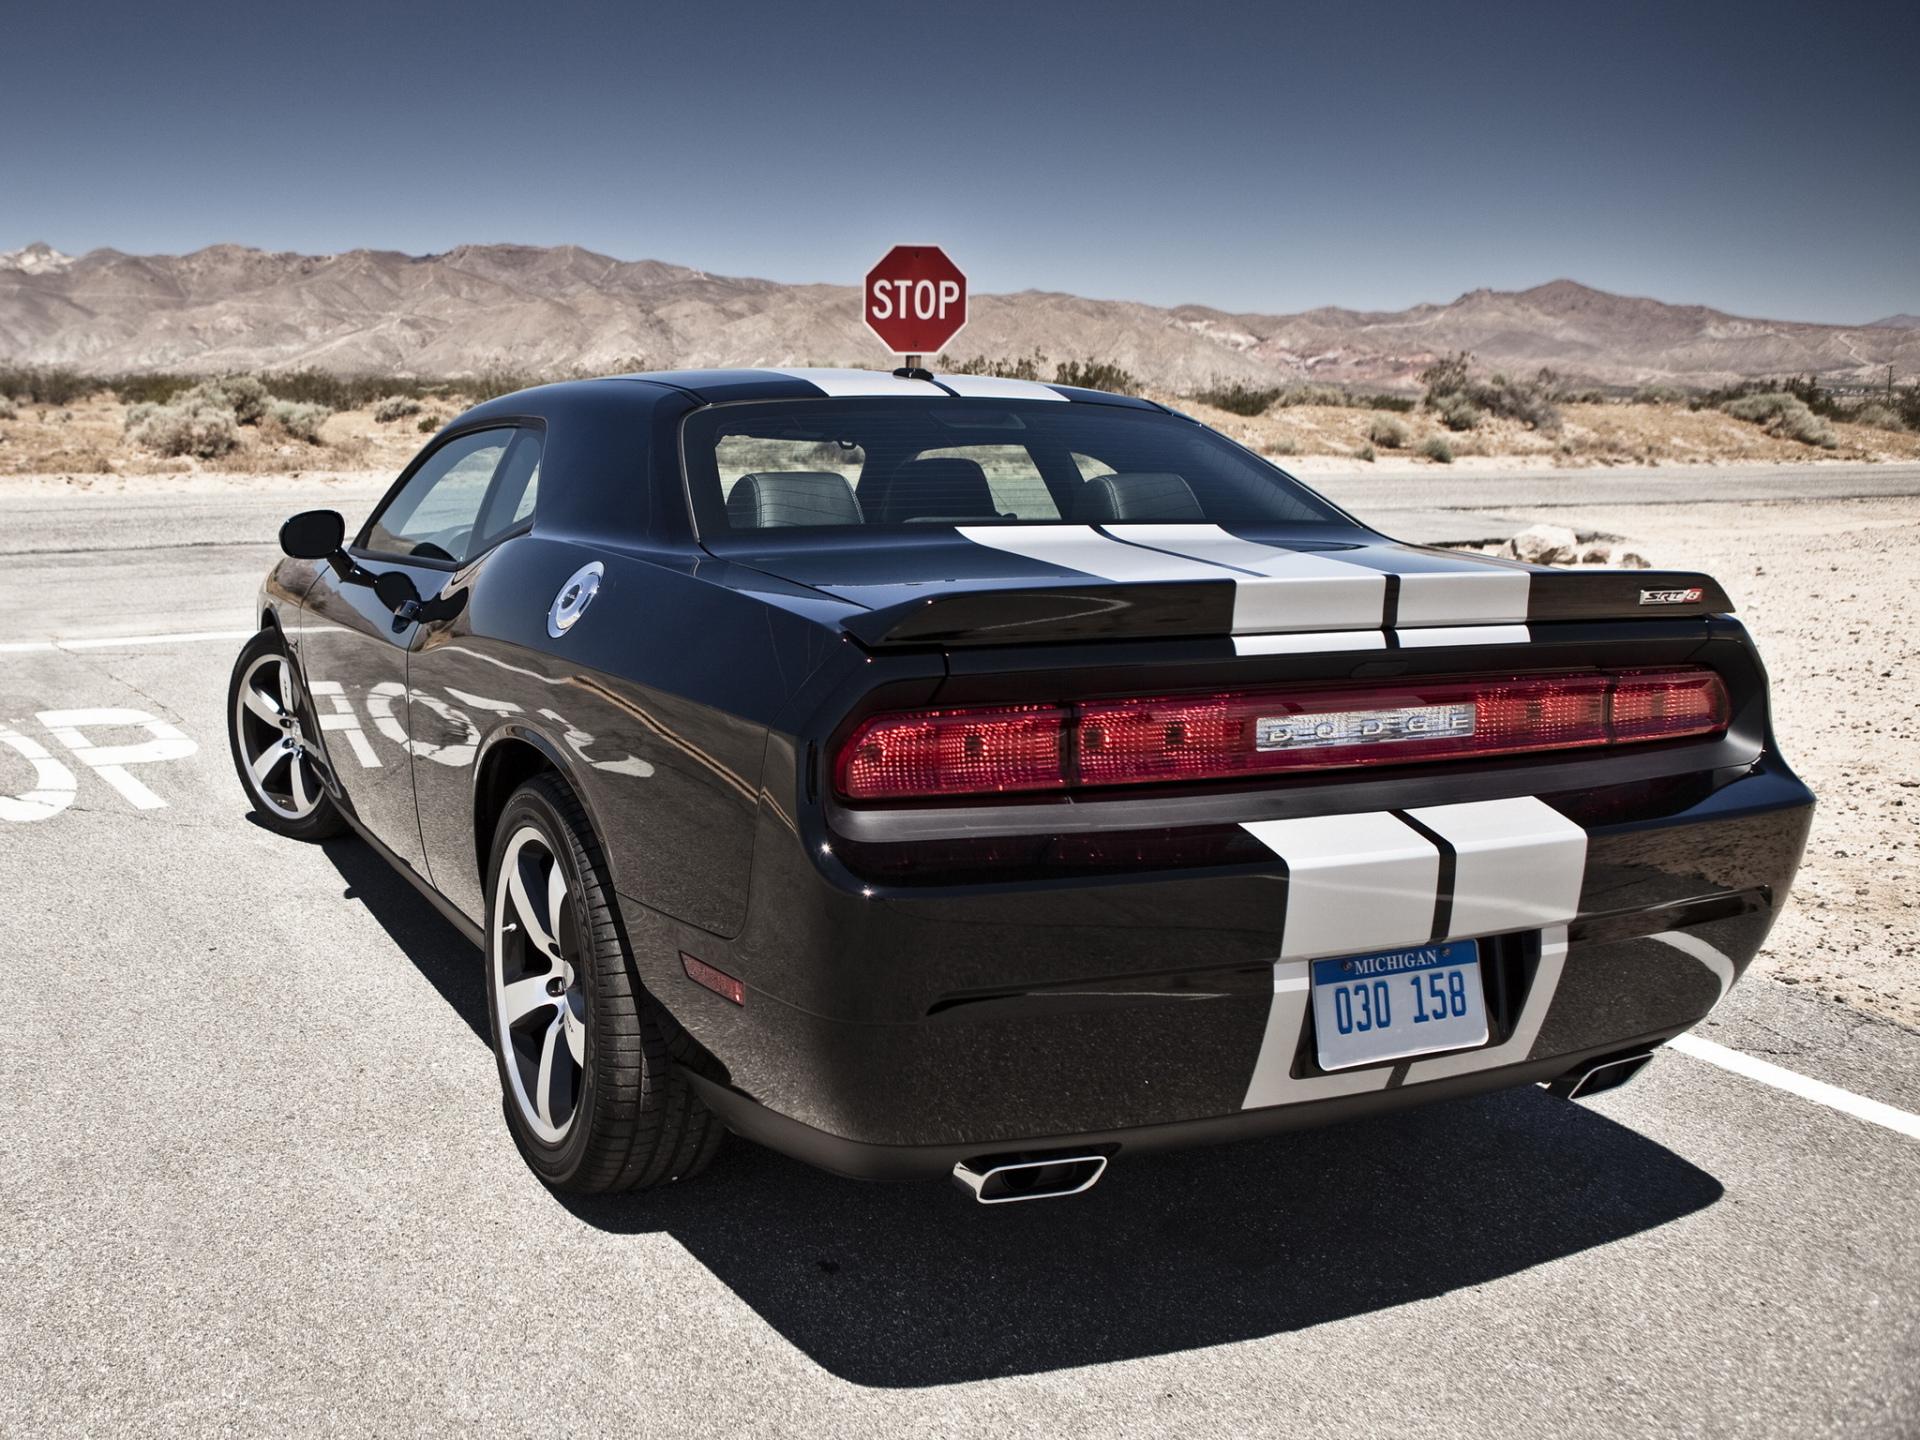 Dodge Challenger SRT8 wallpapers HD quality